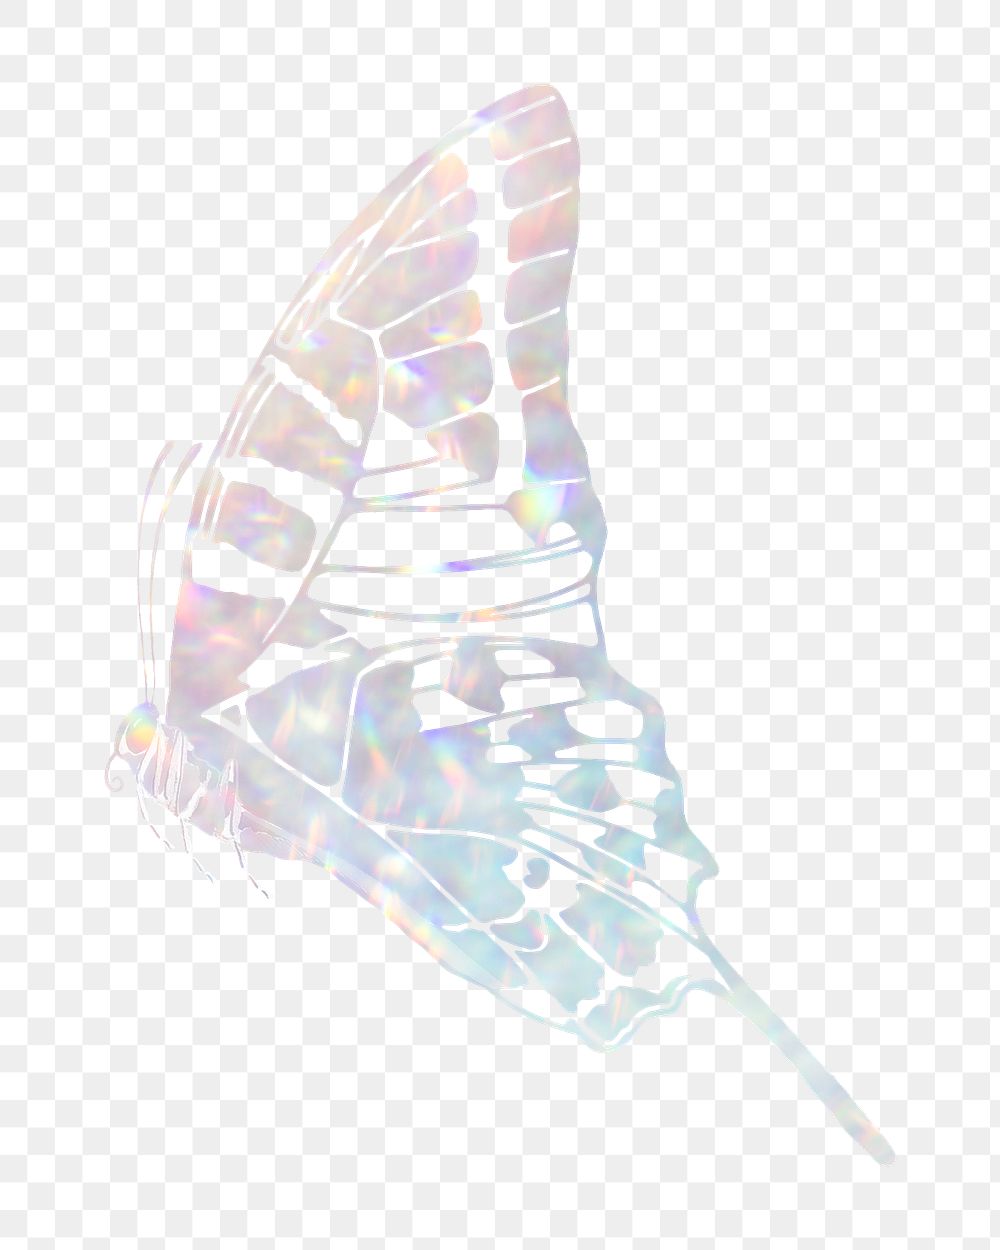 Aesthetic butterfly png sticker, holography design on transparent background. Remixed from the artwork of E.A. S&eacute;guy.